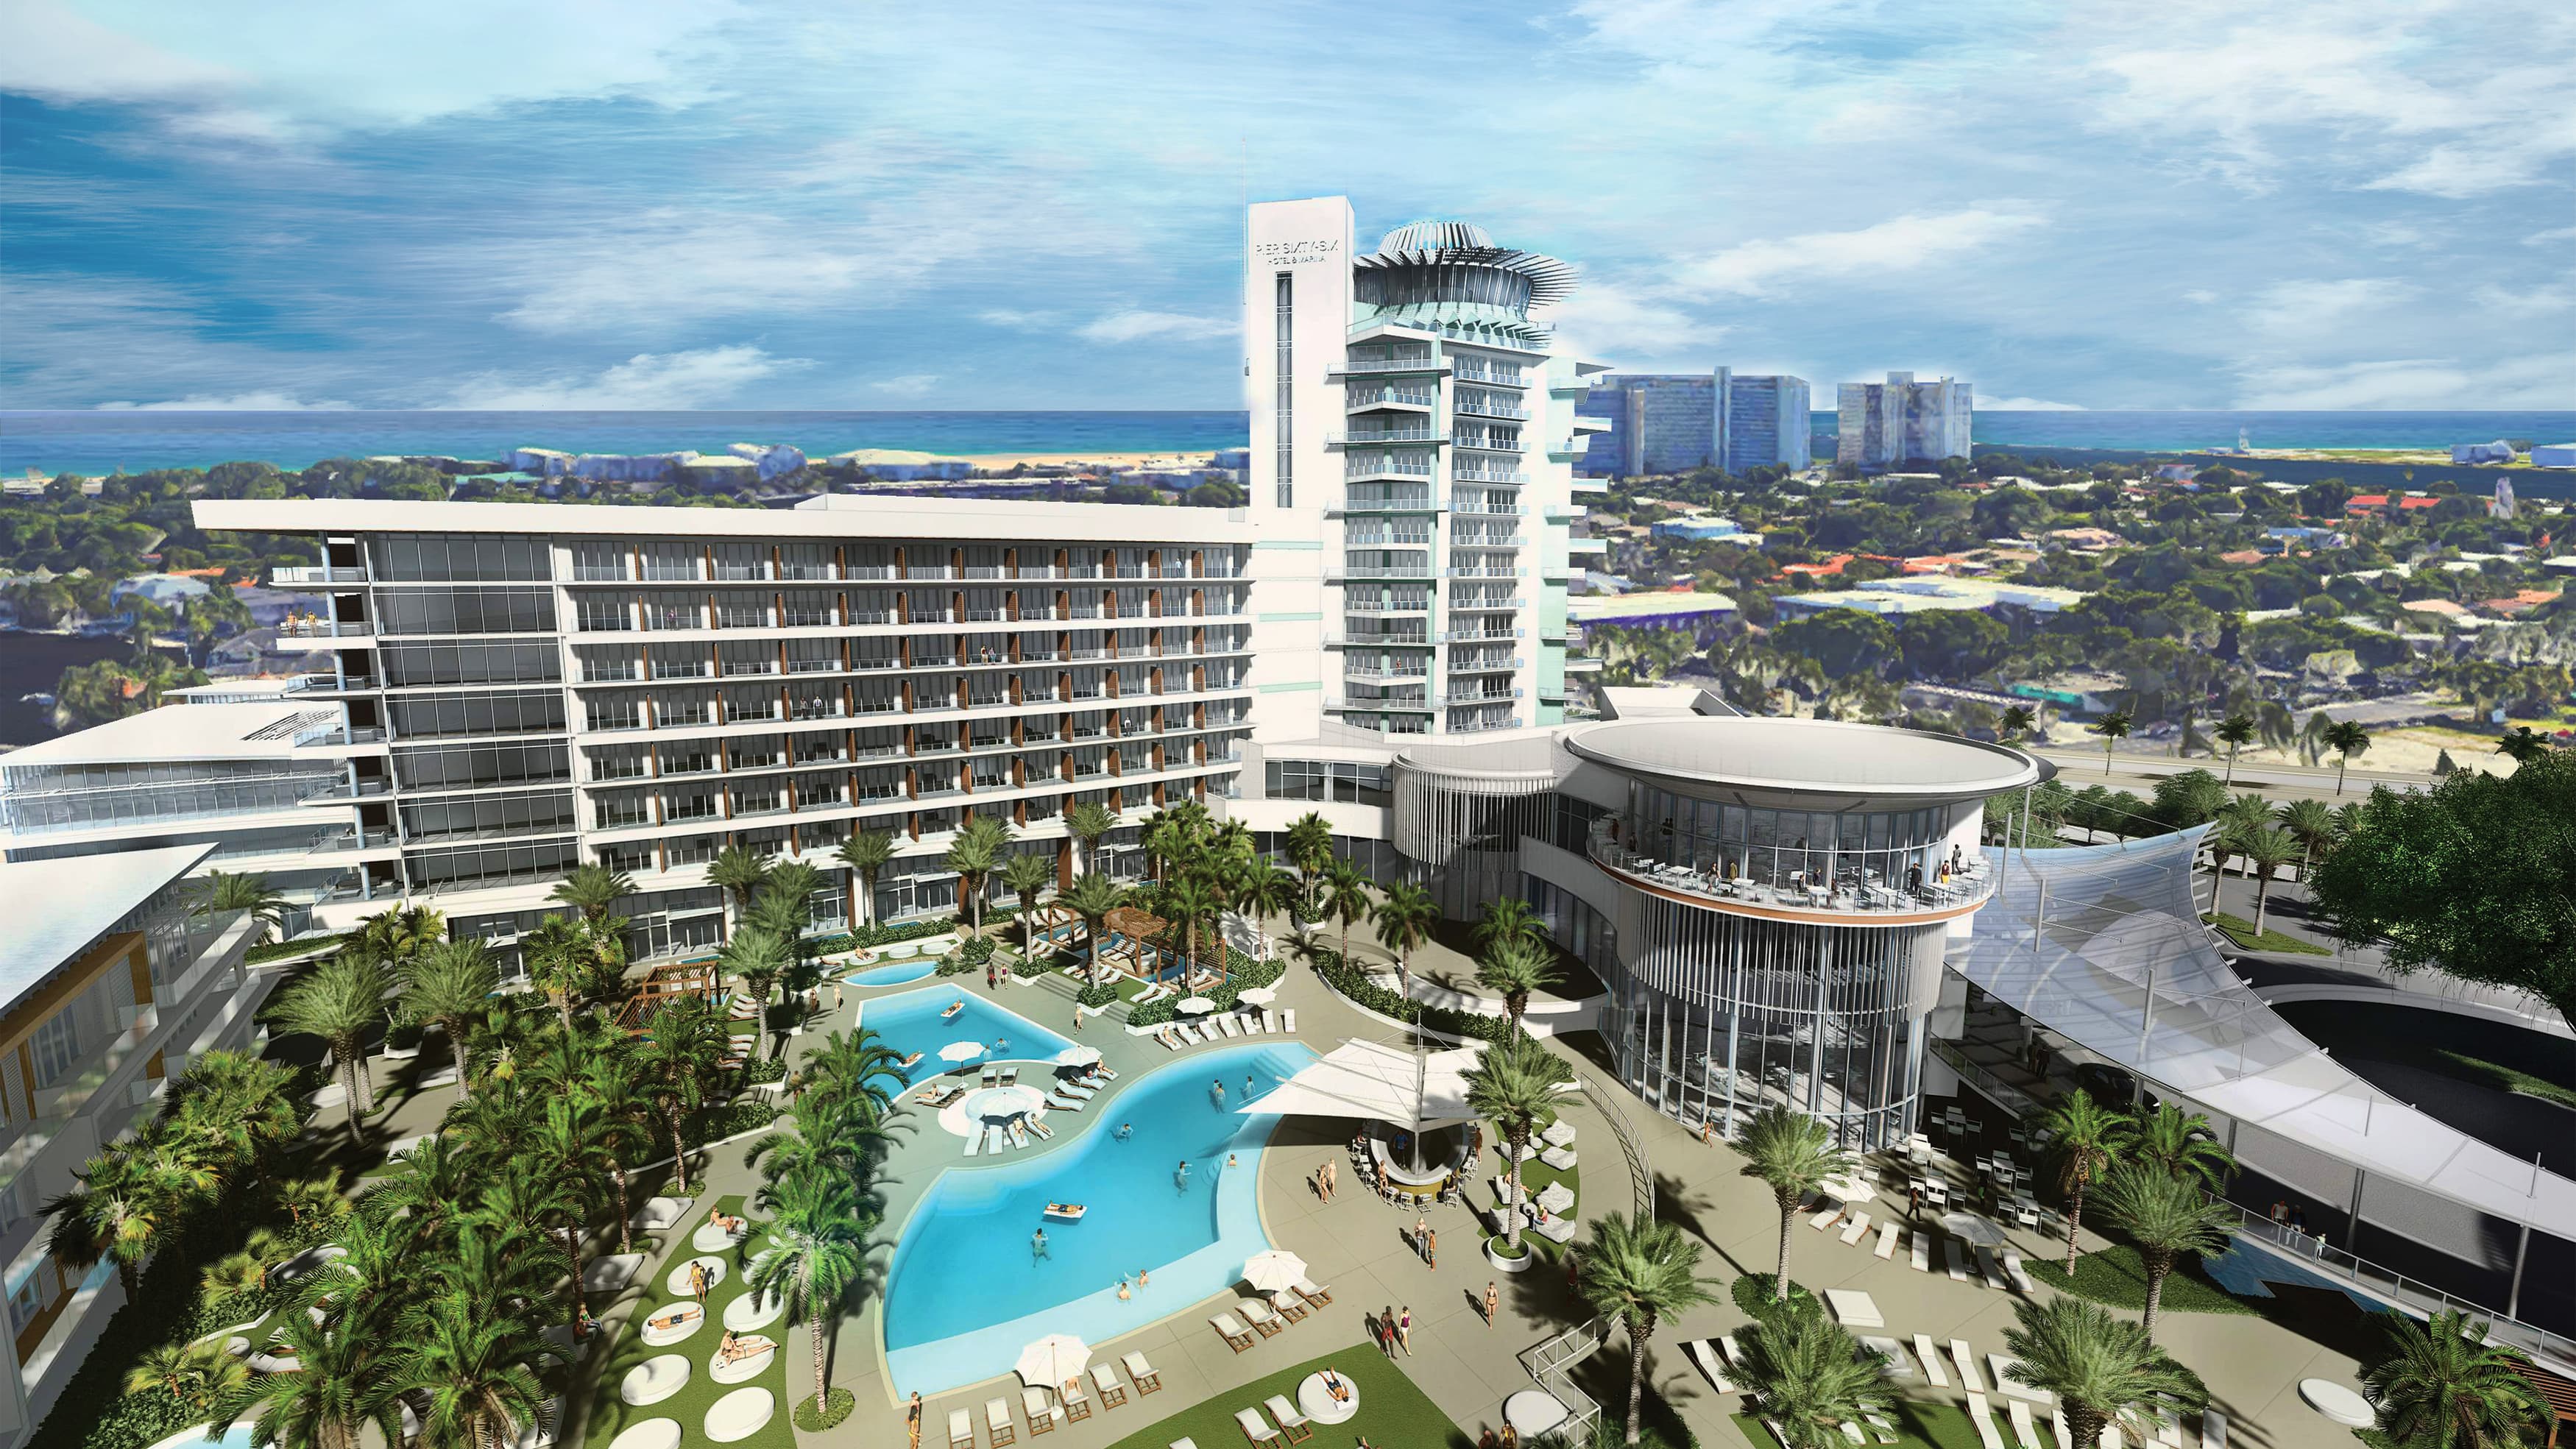 Pier Sixty-Six Hotel & Marina, a mixed-use residential development in Fort Lauderdale, Florida.